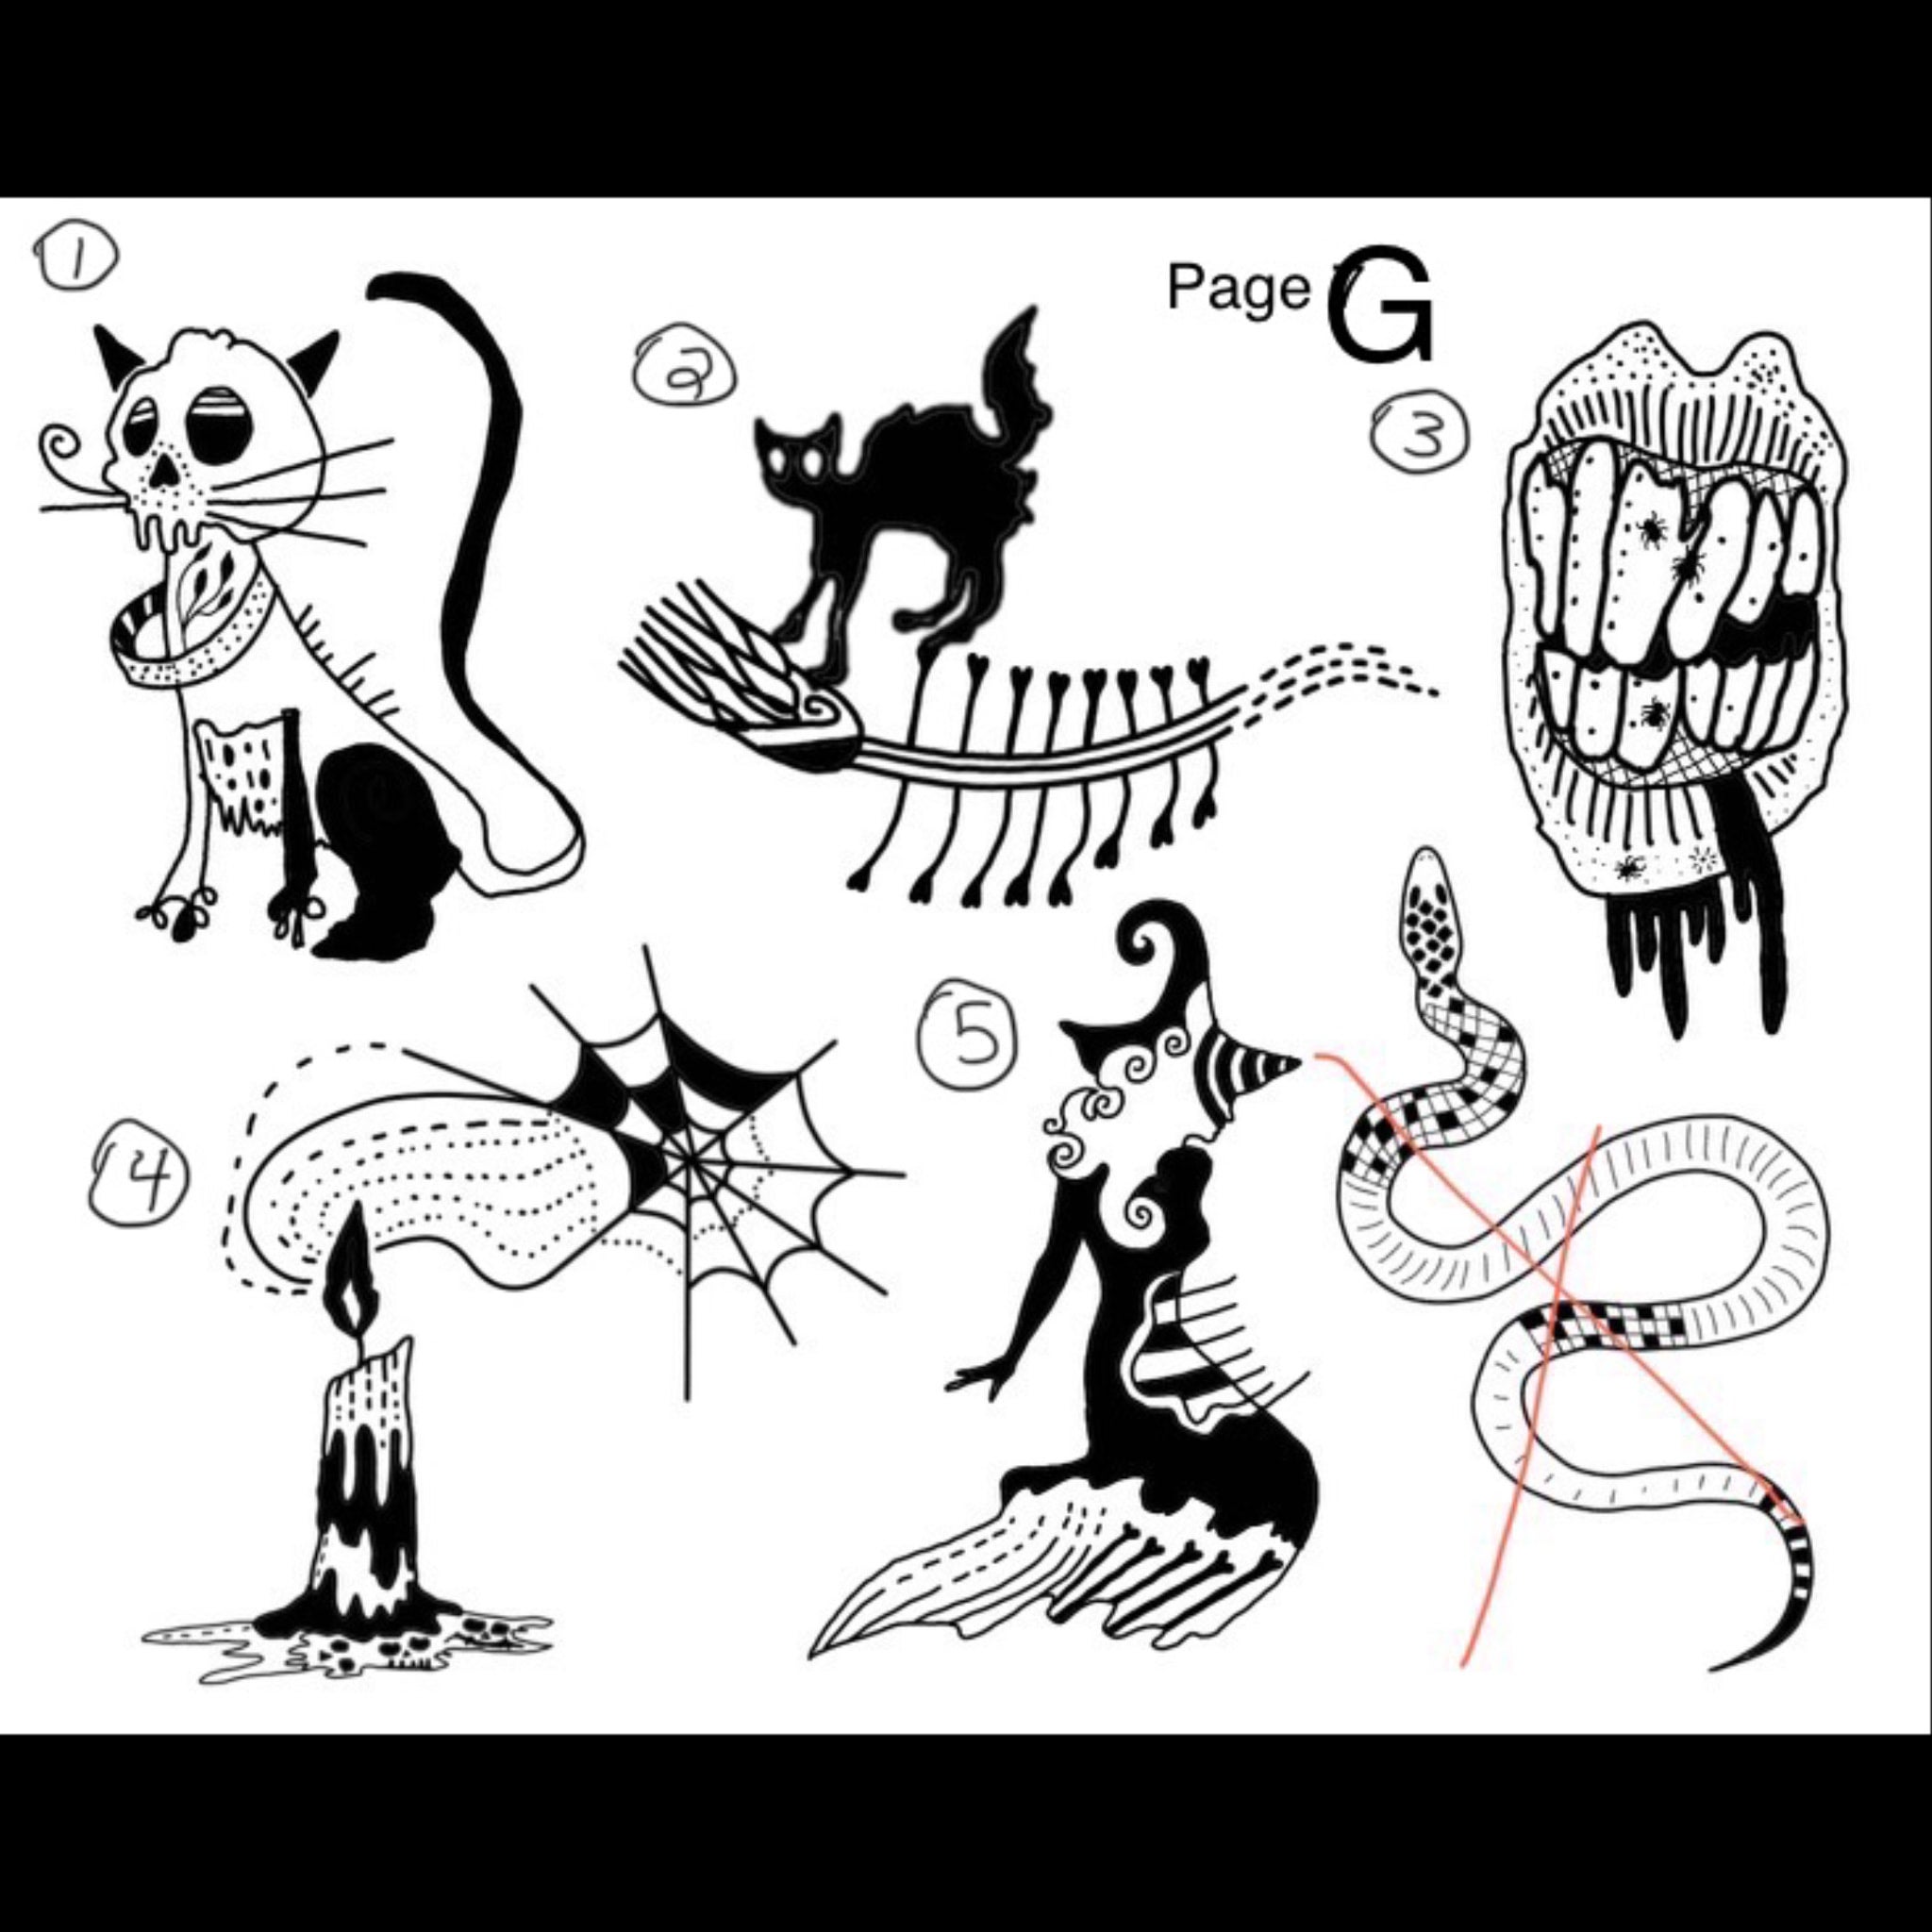 Sabrina's Art Blog — For my first tattoo flash page, I'm going with...